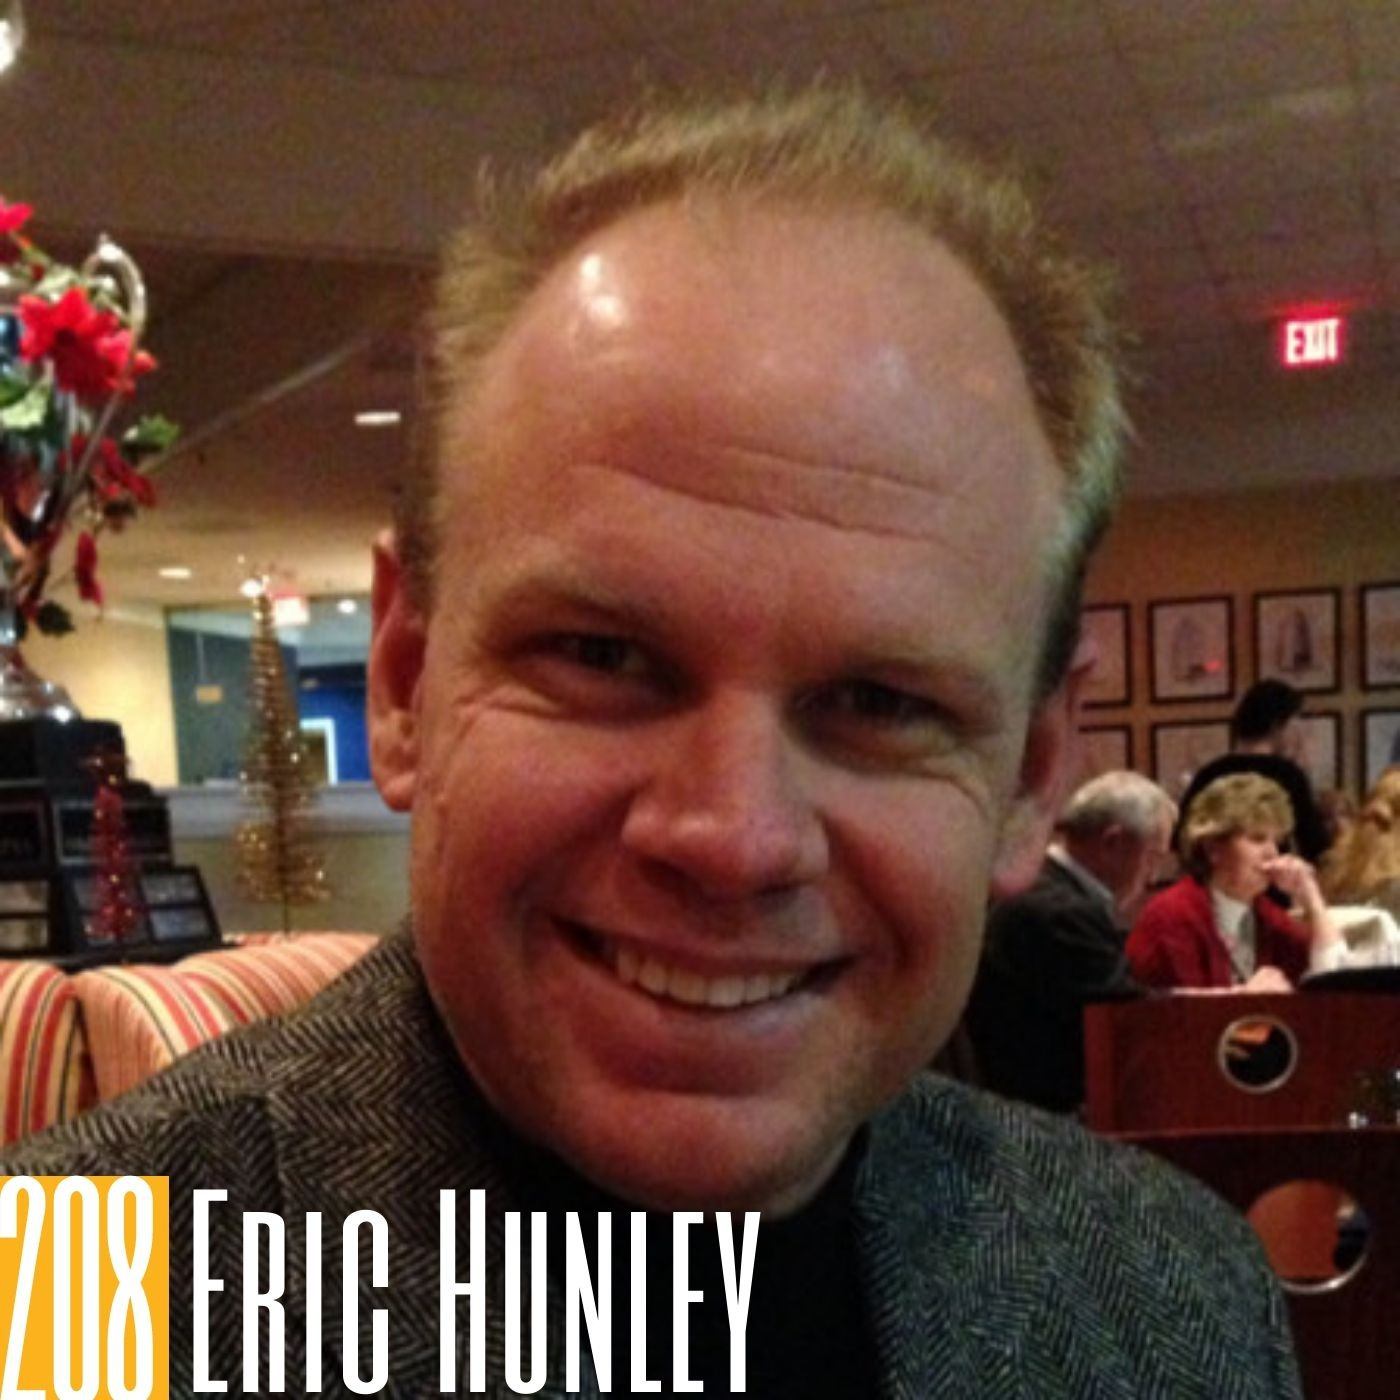 208 Eric Hunley - Honoring and Respecting Your Guests